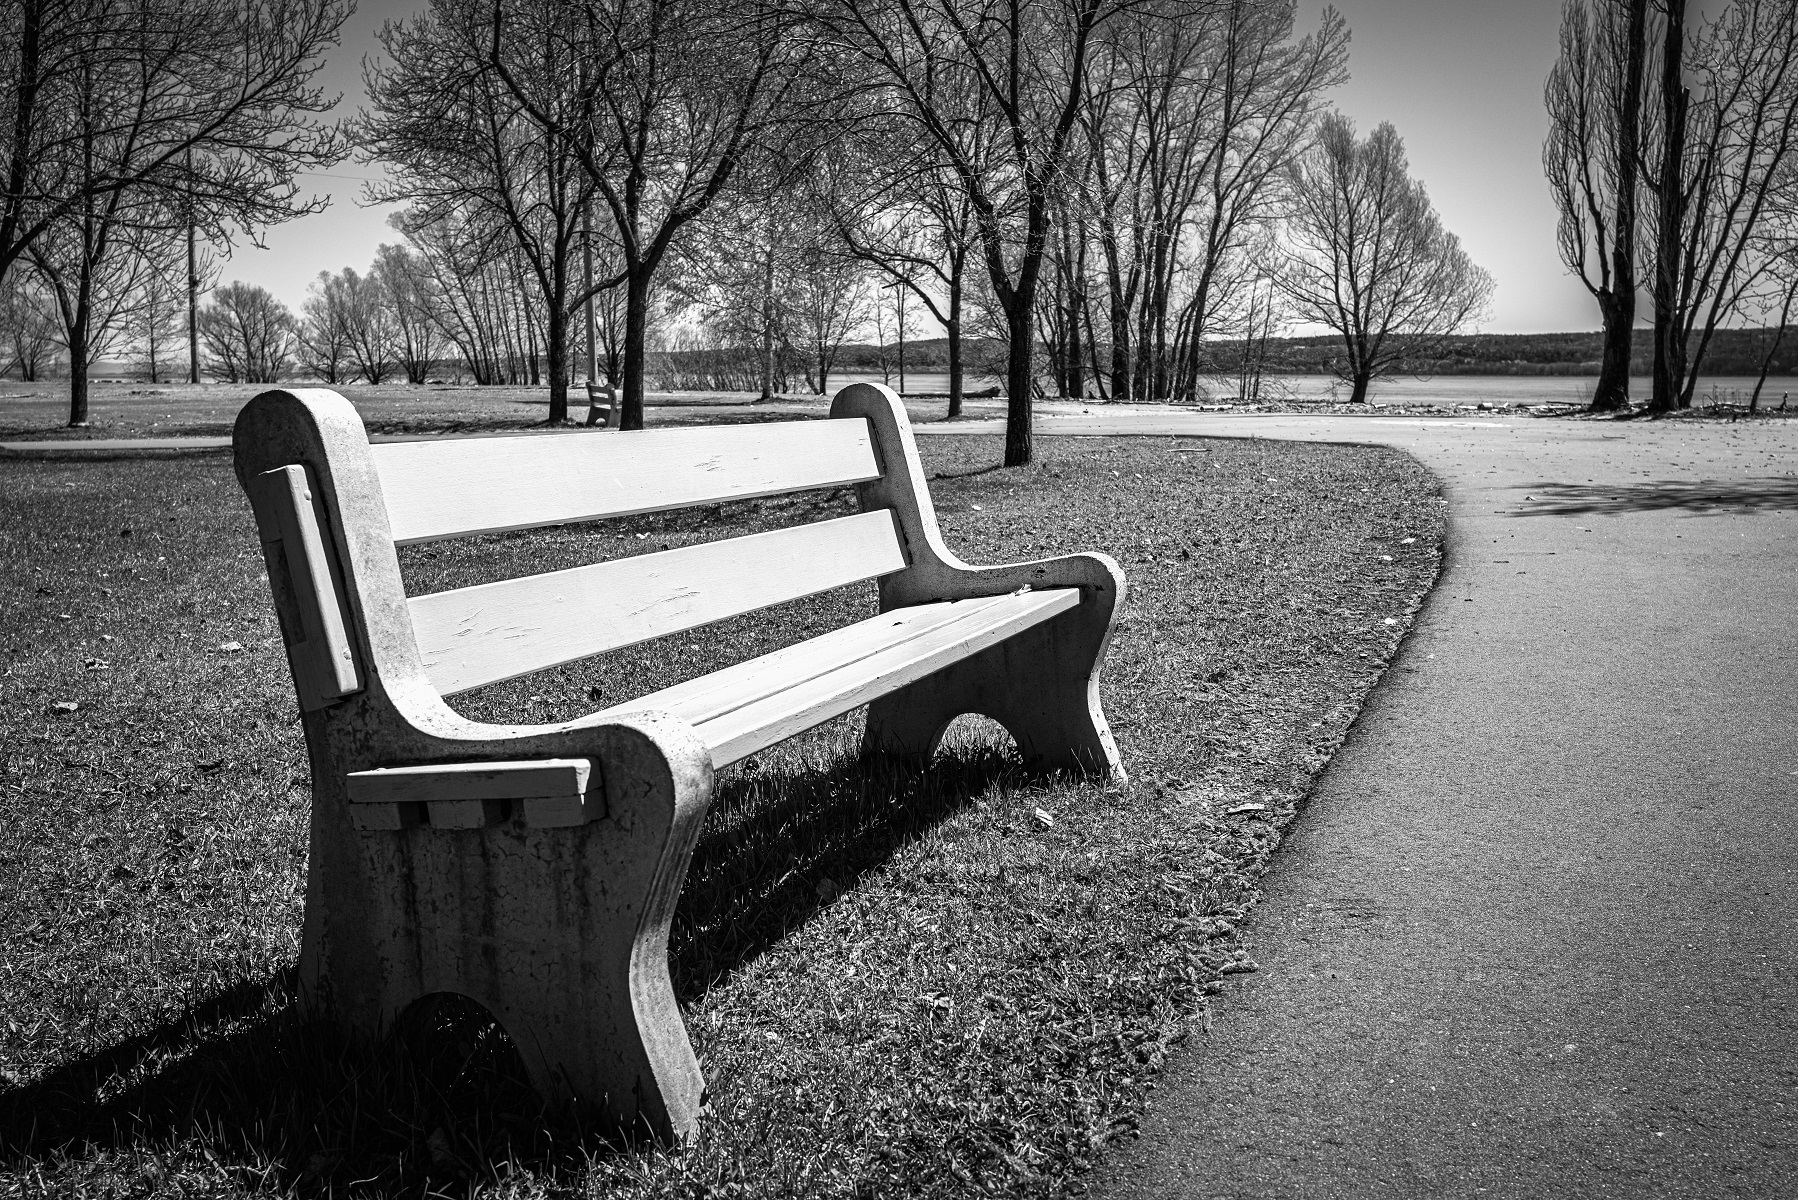 Black and white photograph of an empty park bench next to a paved walkway in early spring